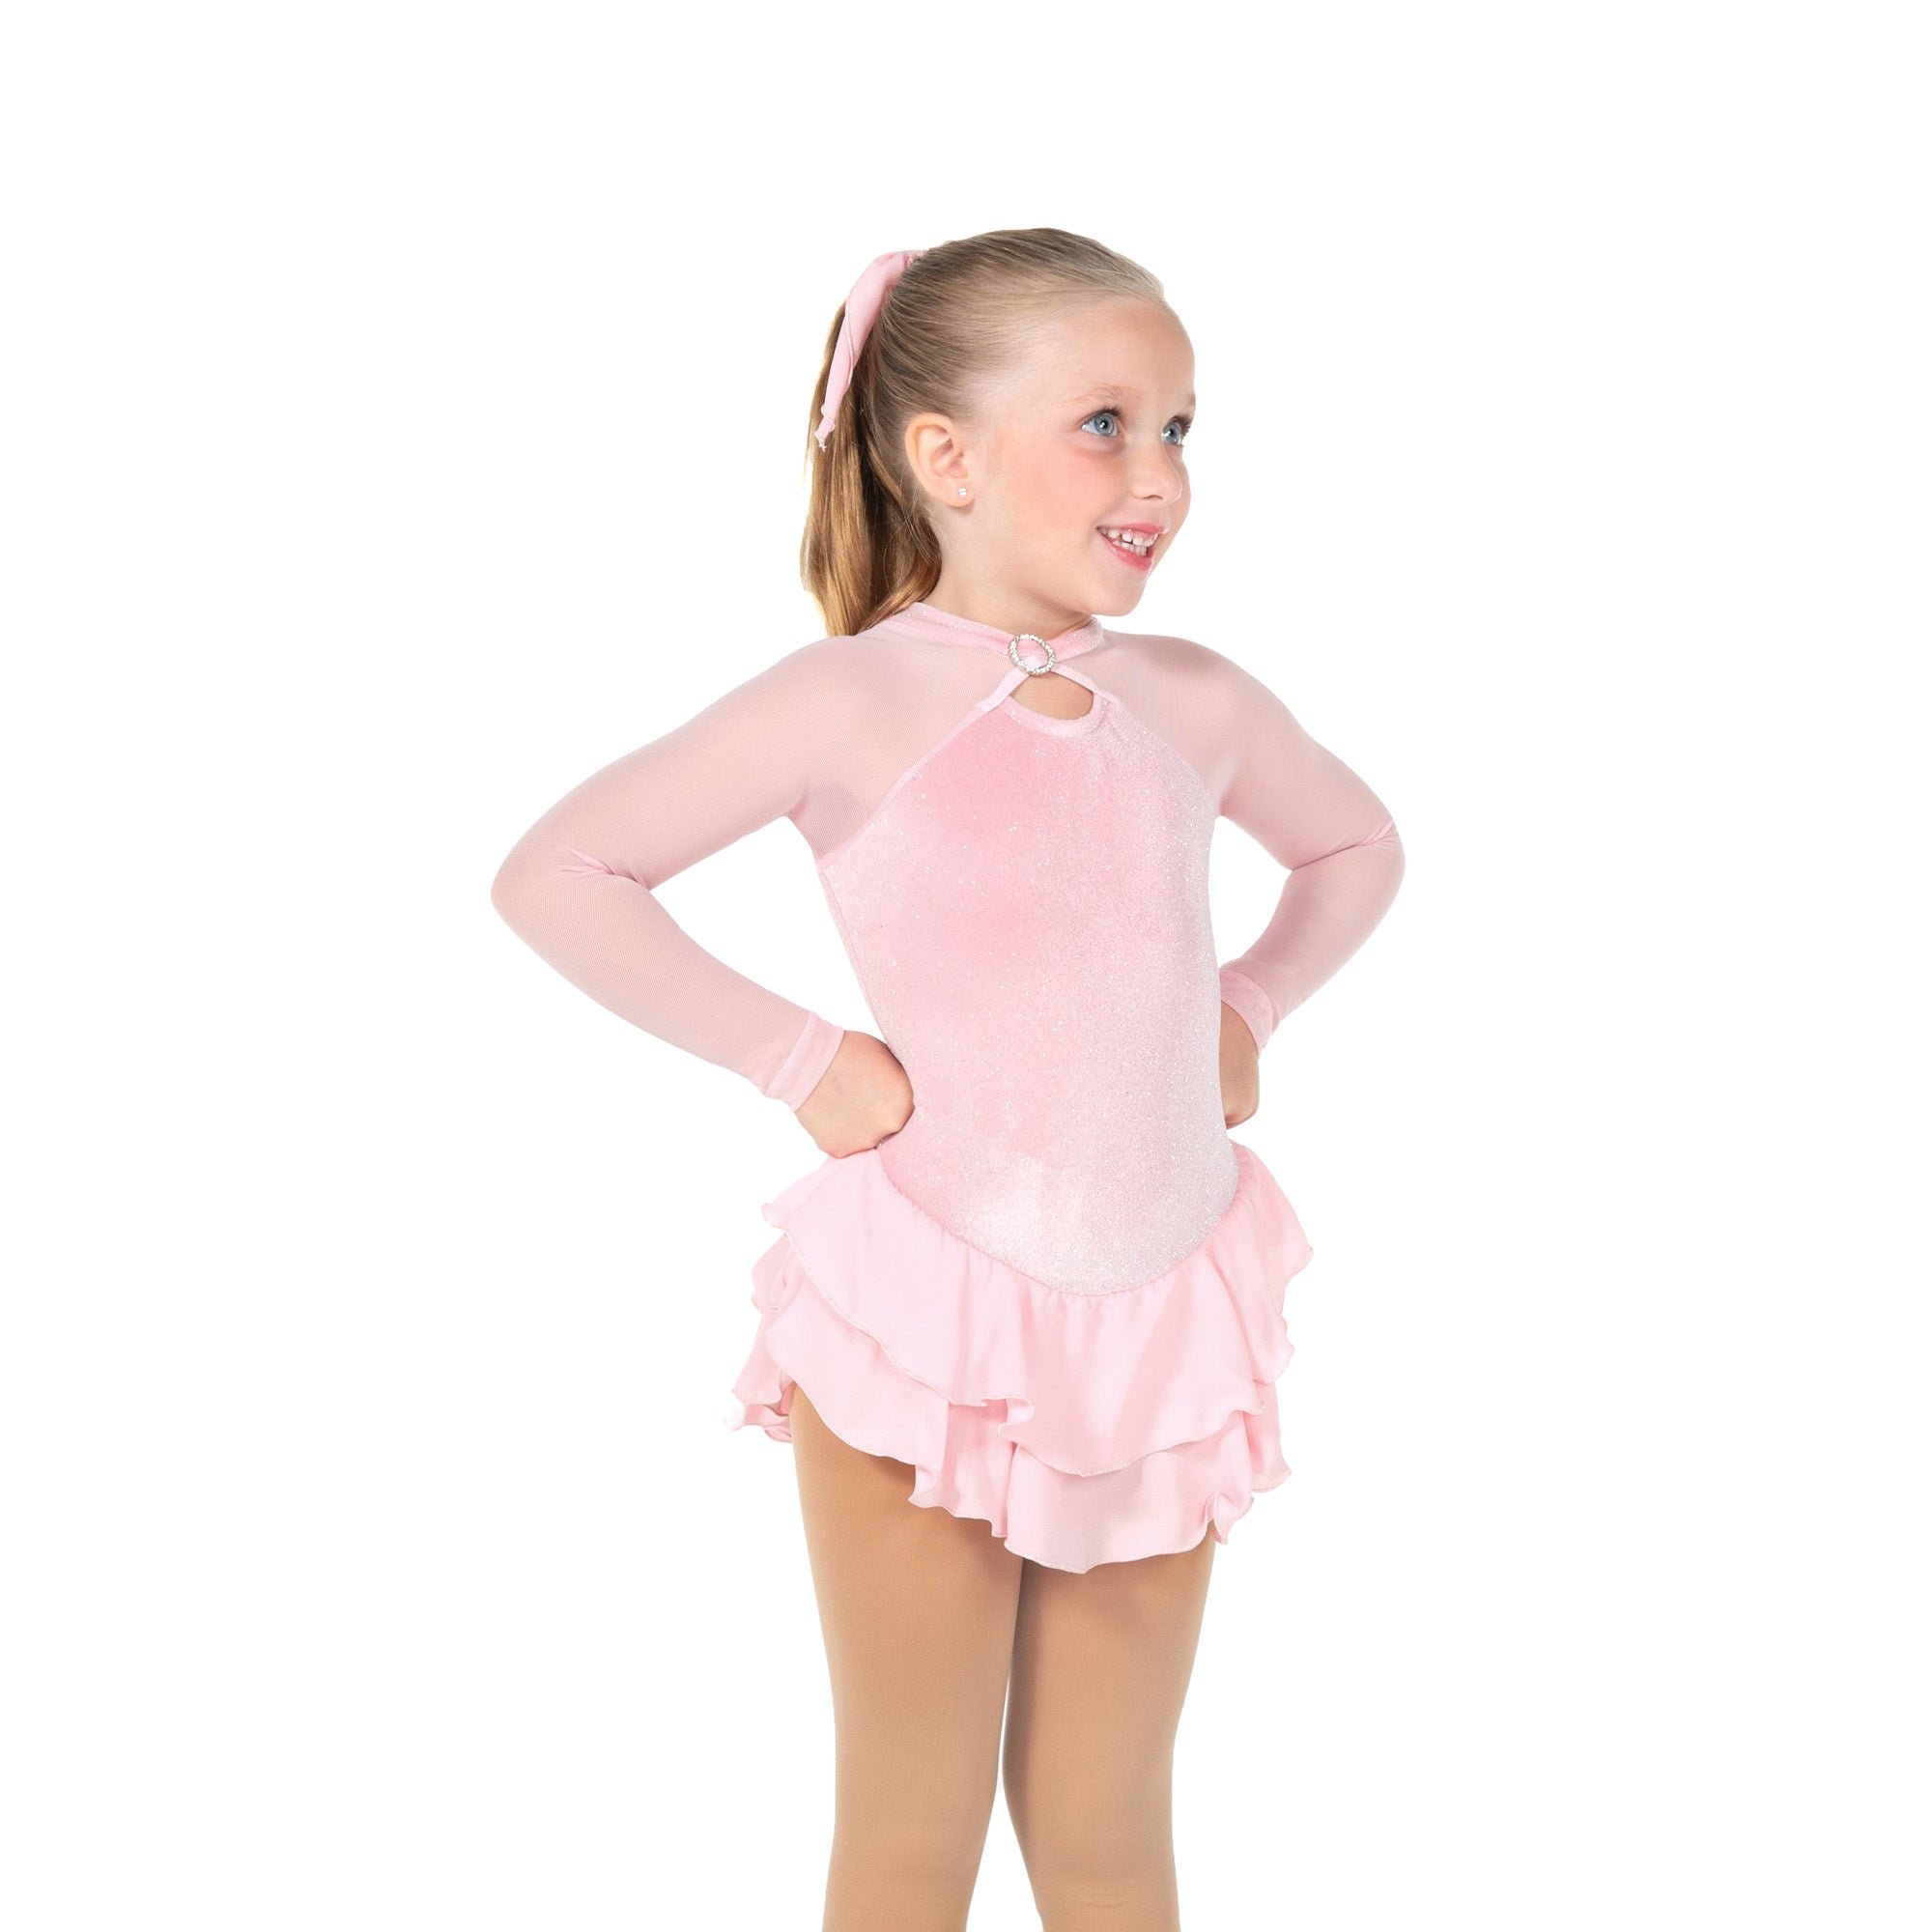 645 Shimmer Skating Dress in Pink by Jerry's